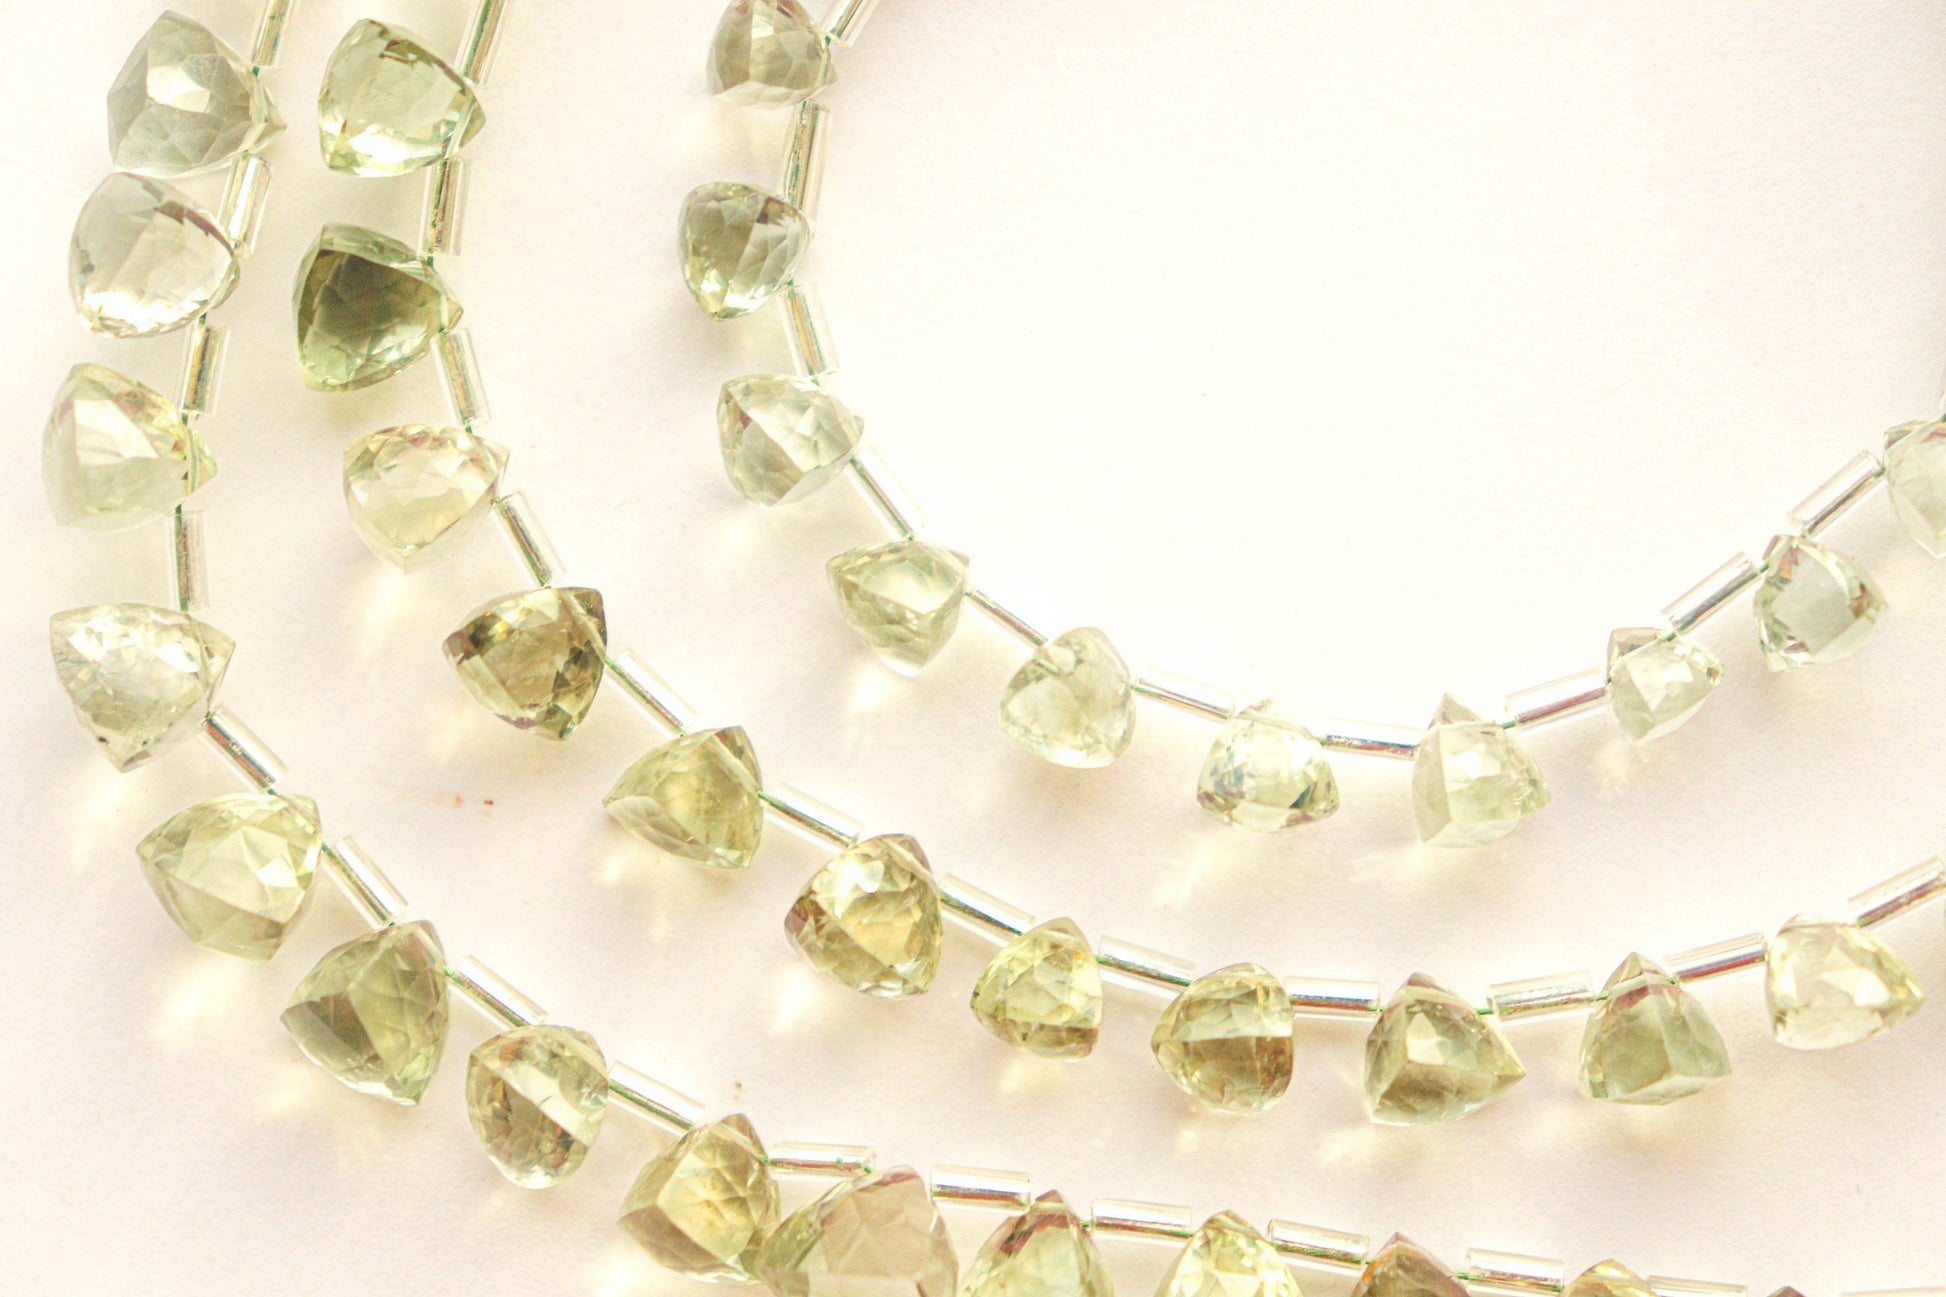 Green Amethyst 3D Trillion Shape Beads | Natural Gemstone Beads for Jewelry Making | Beadsforyourjewellery Beadsforyourjewelry